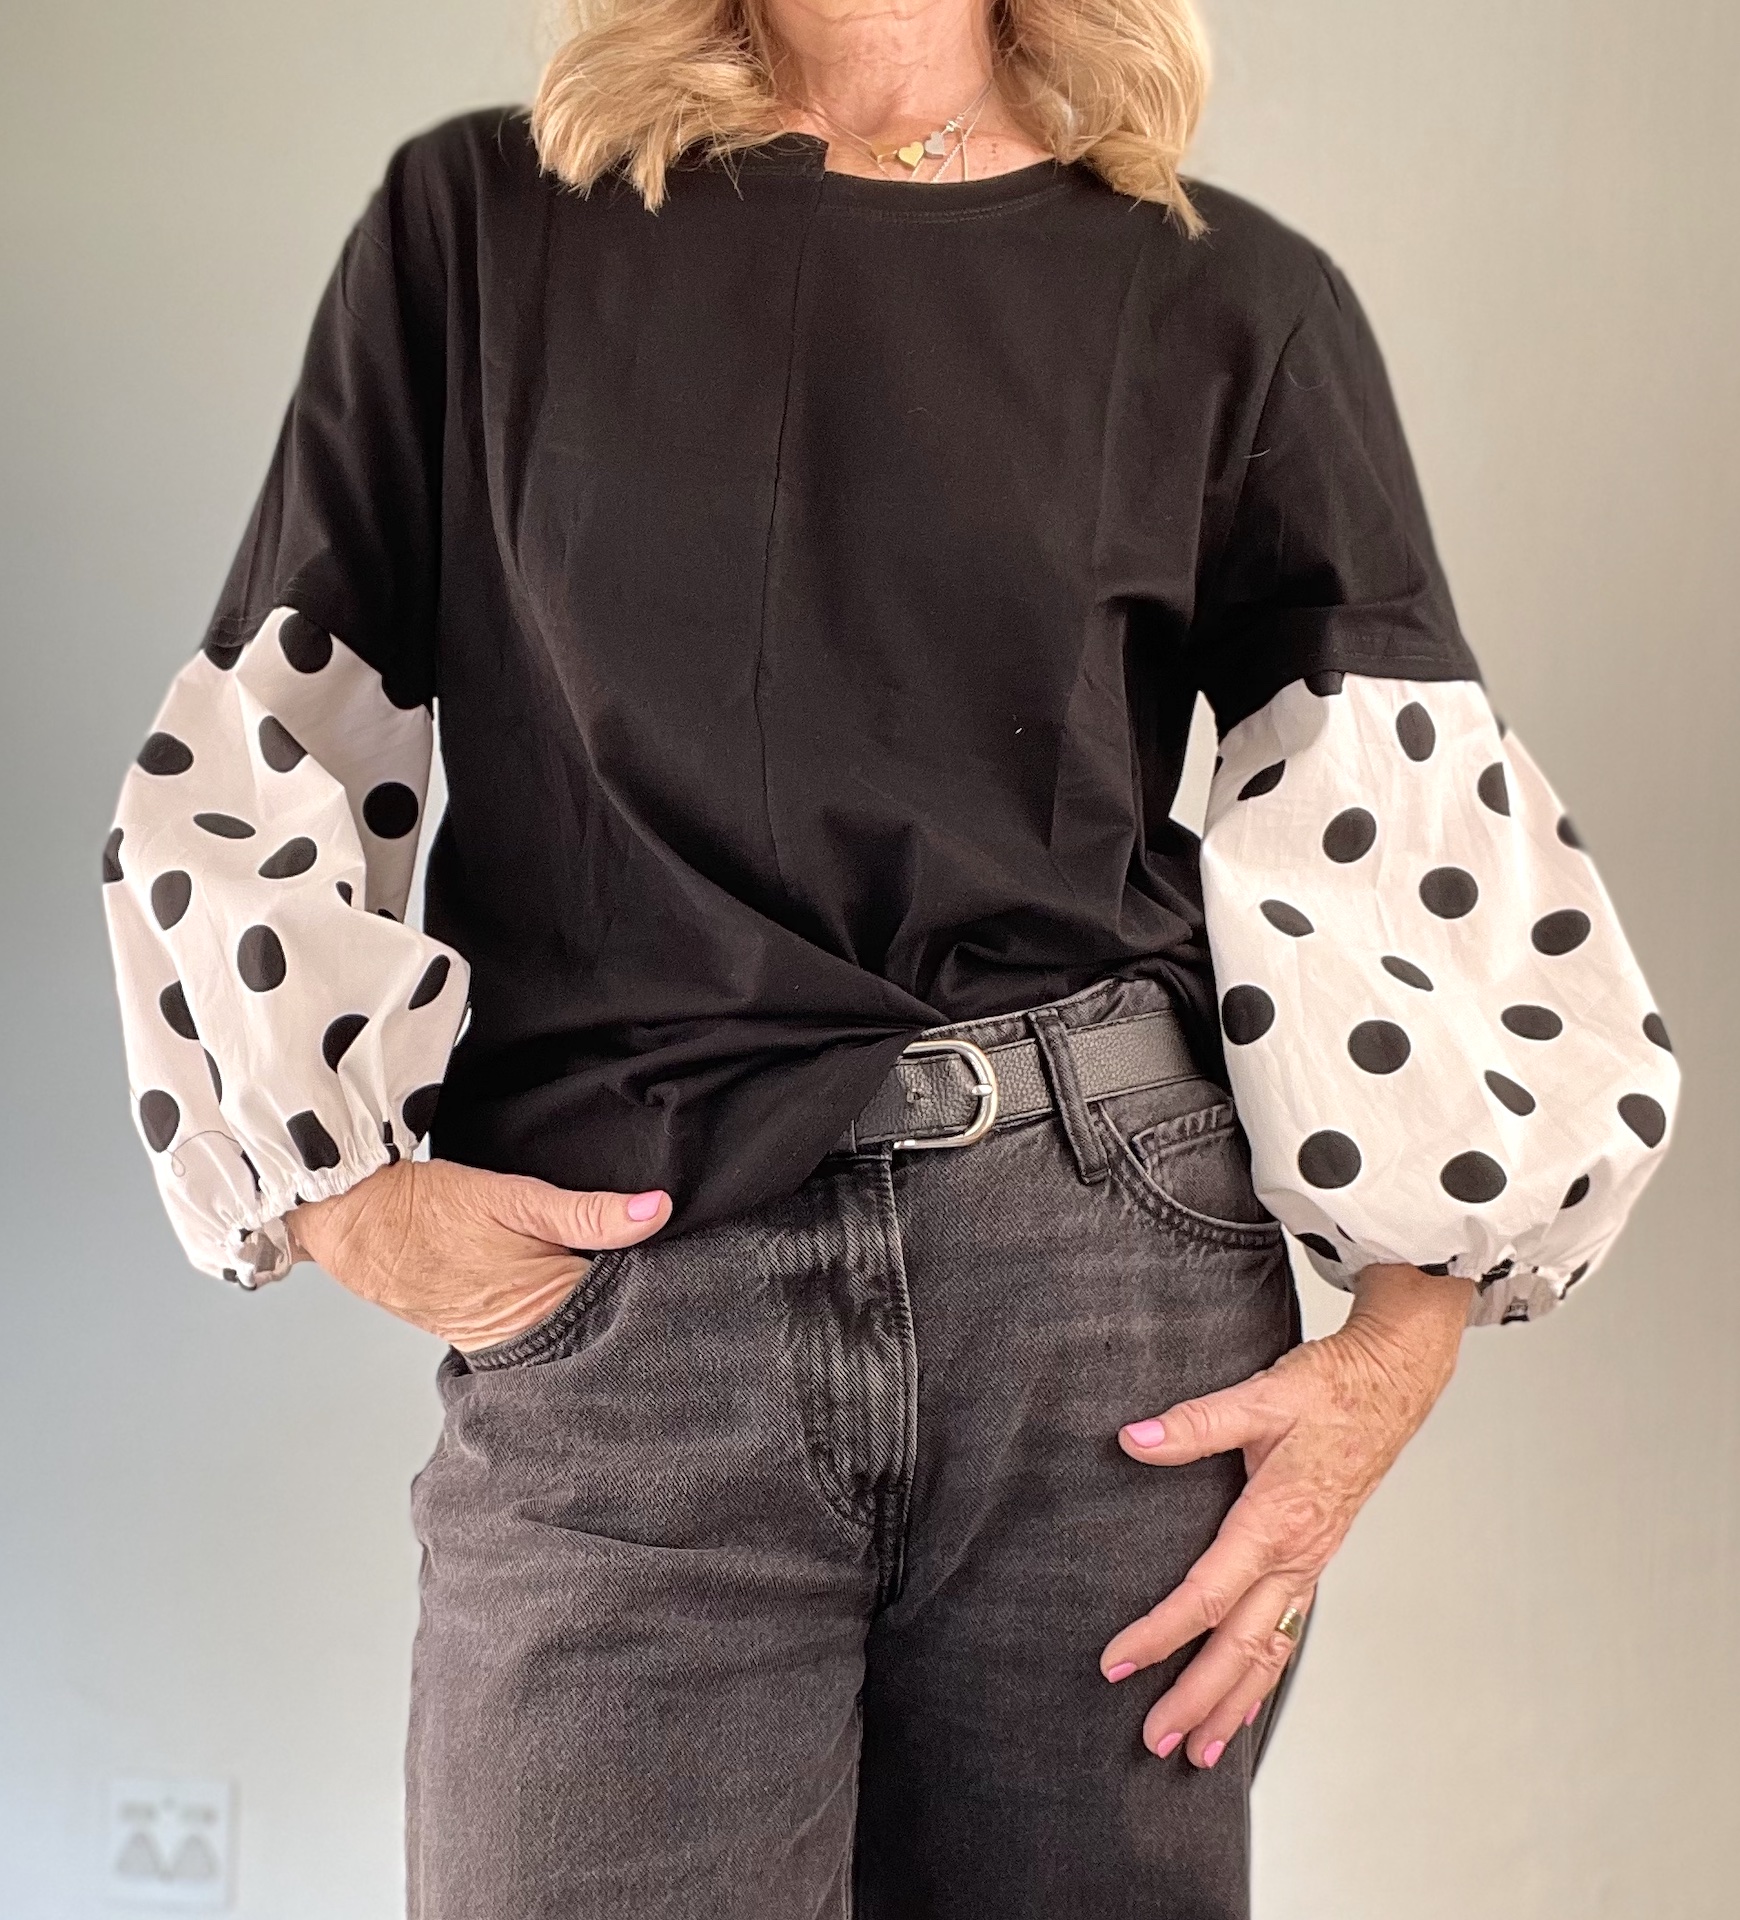 Black T – style 4 white with black polka dots